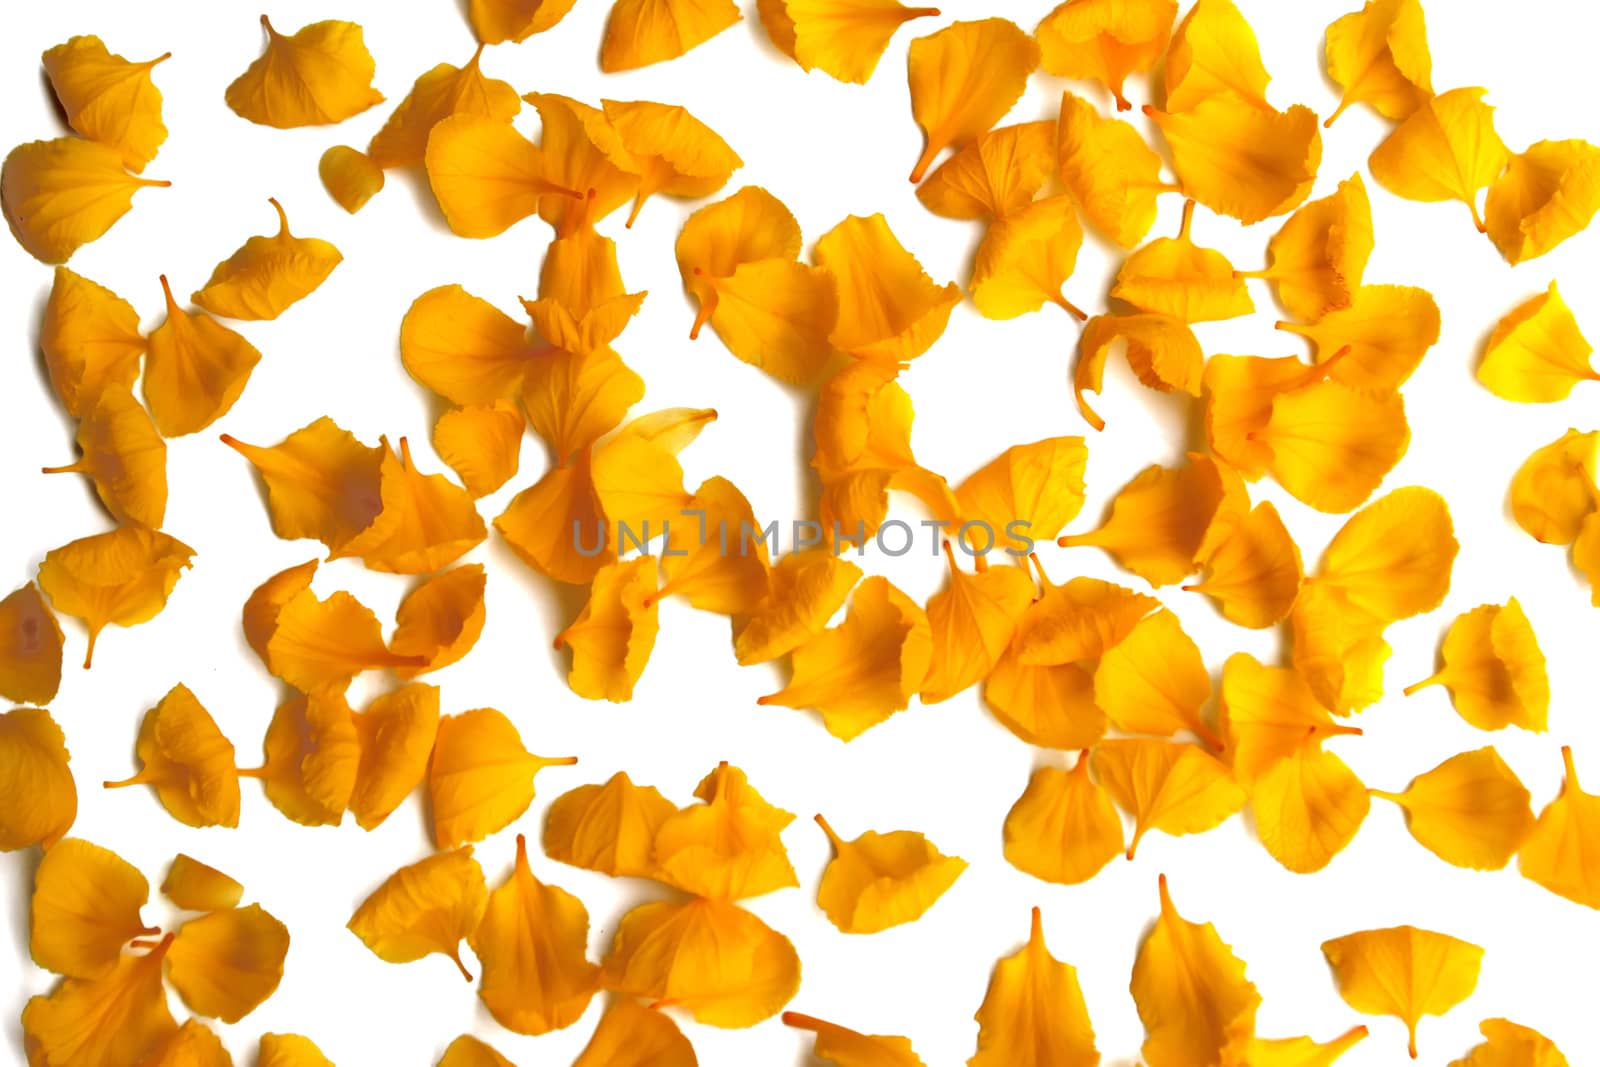 Yellow petals on white background 